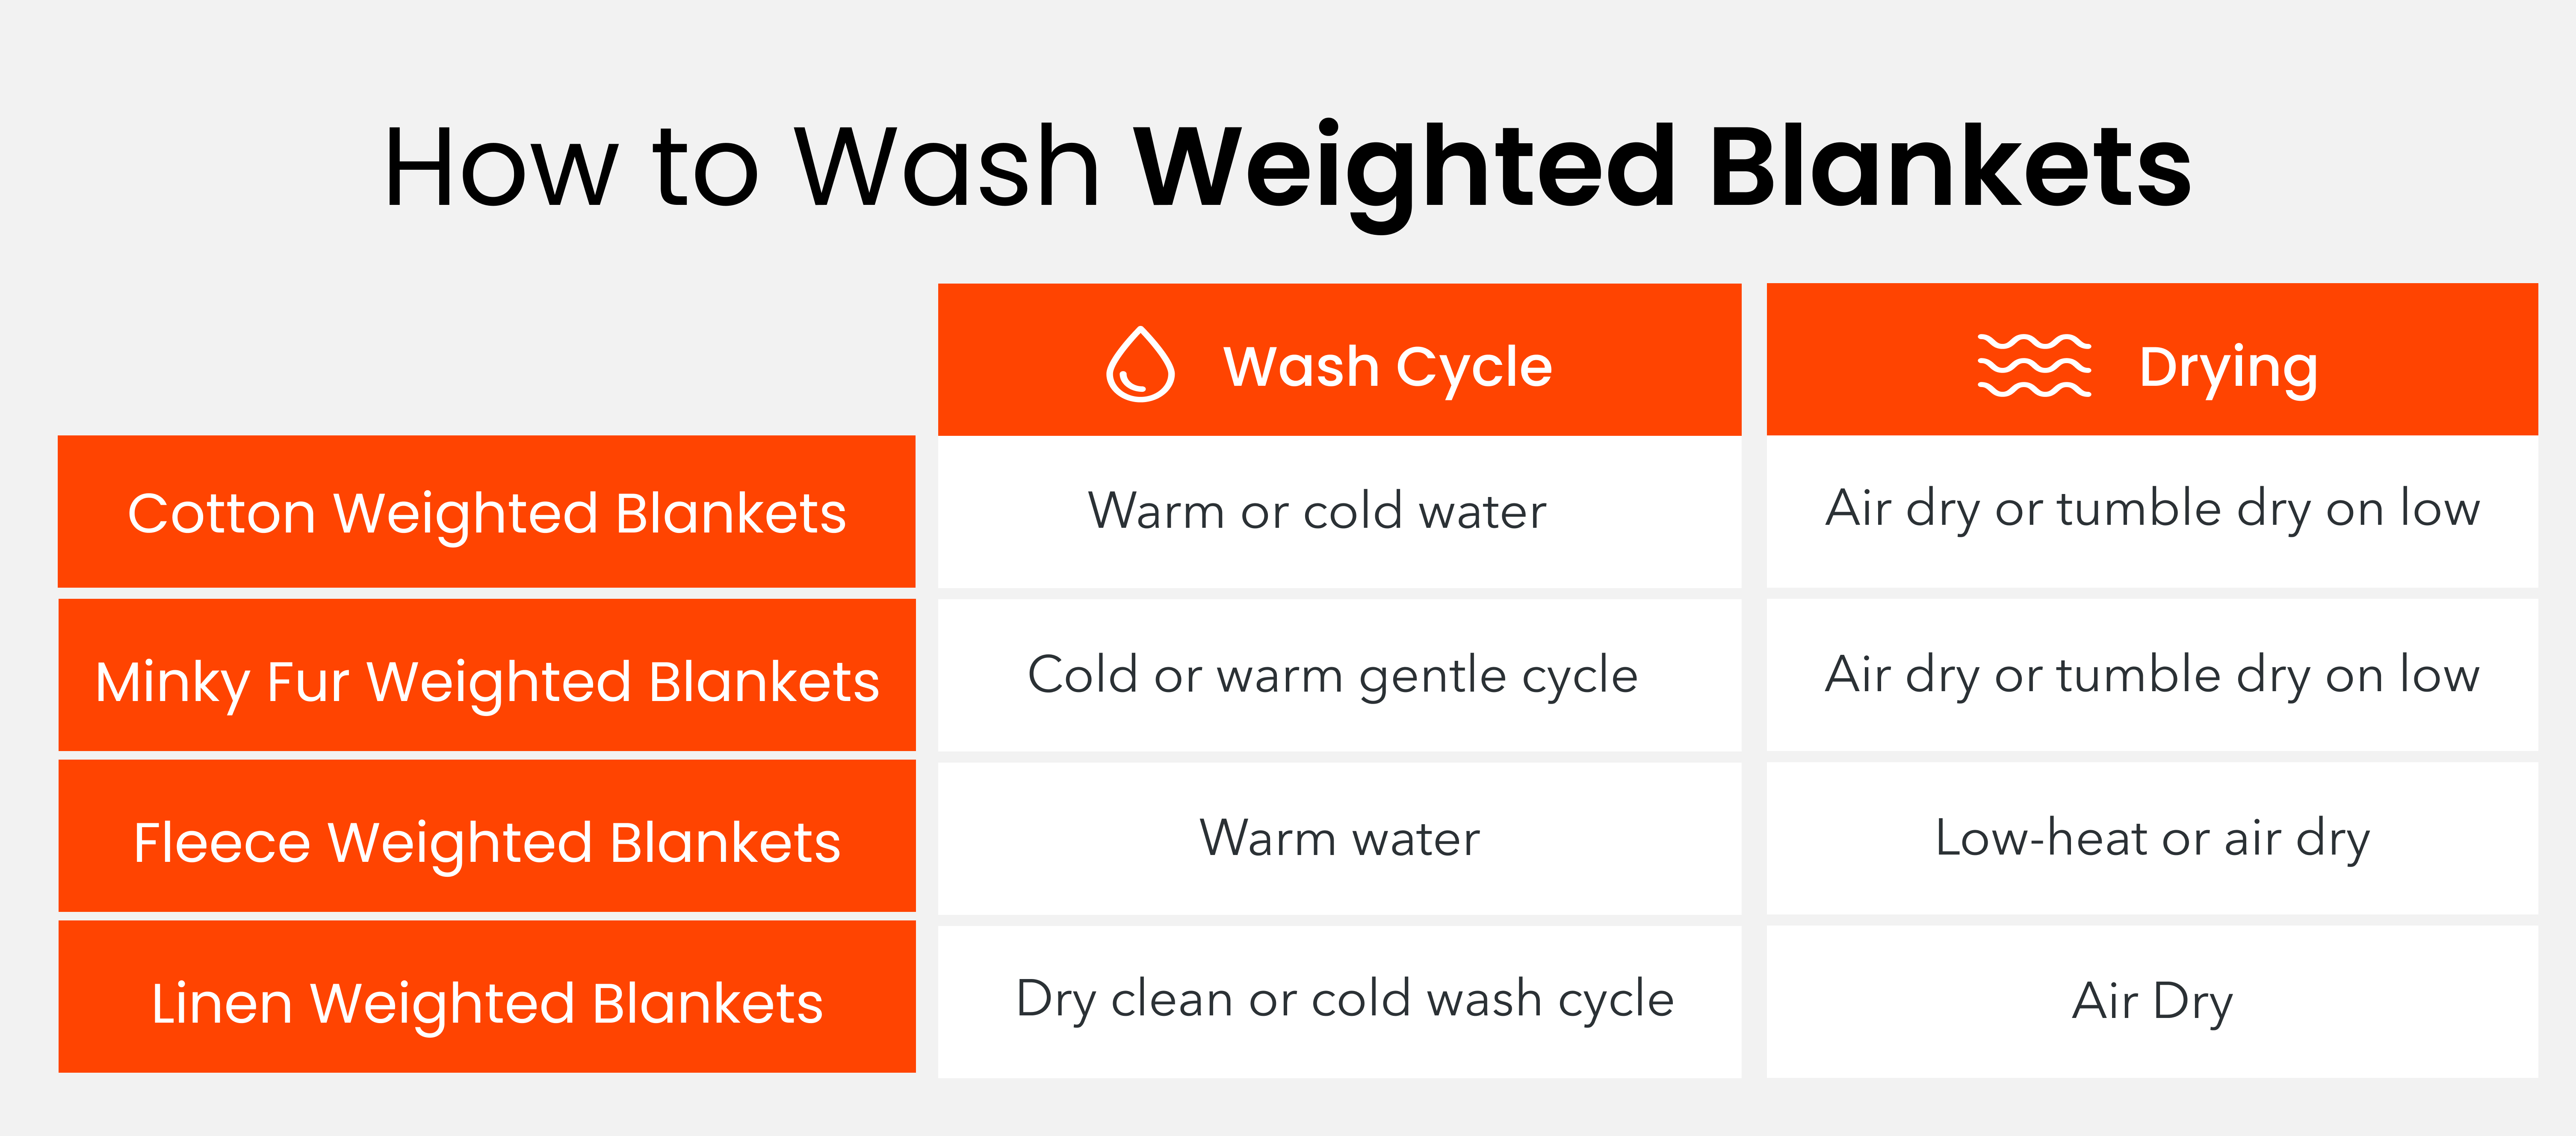 How to wash different types of weighted blankets